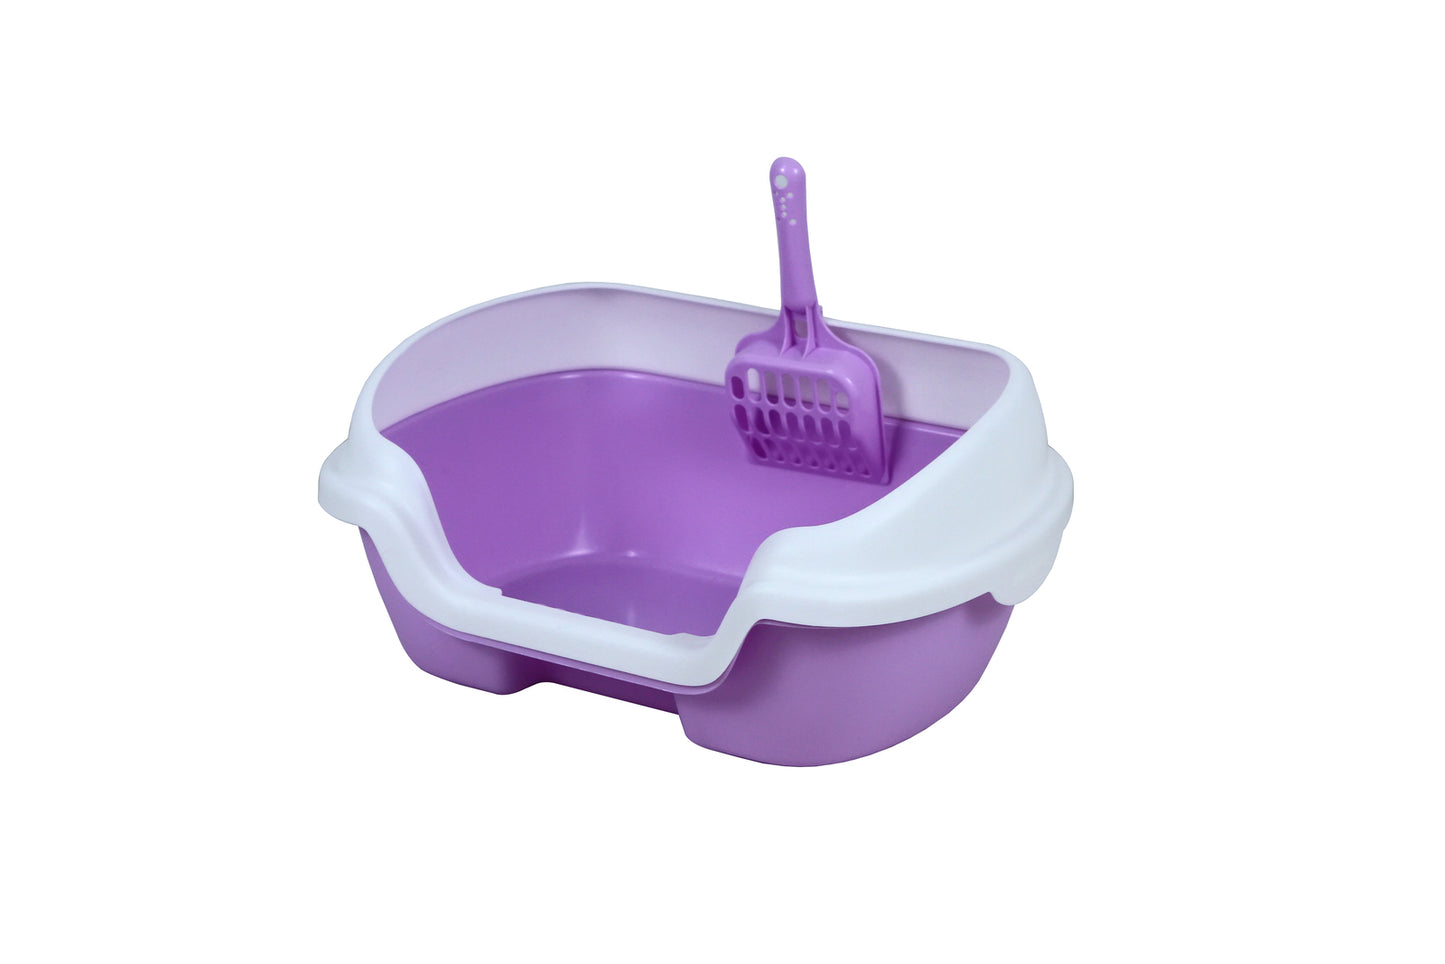 YES4PETS Small Portable Cat Kitten Rabbit Toilet Litter Box Tray with Scoop Purple